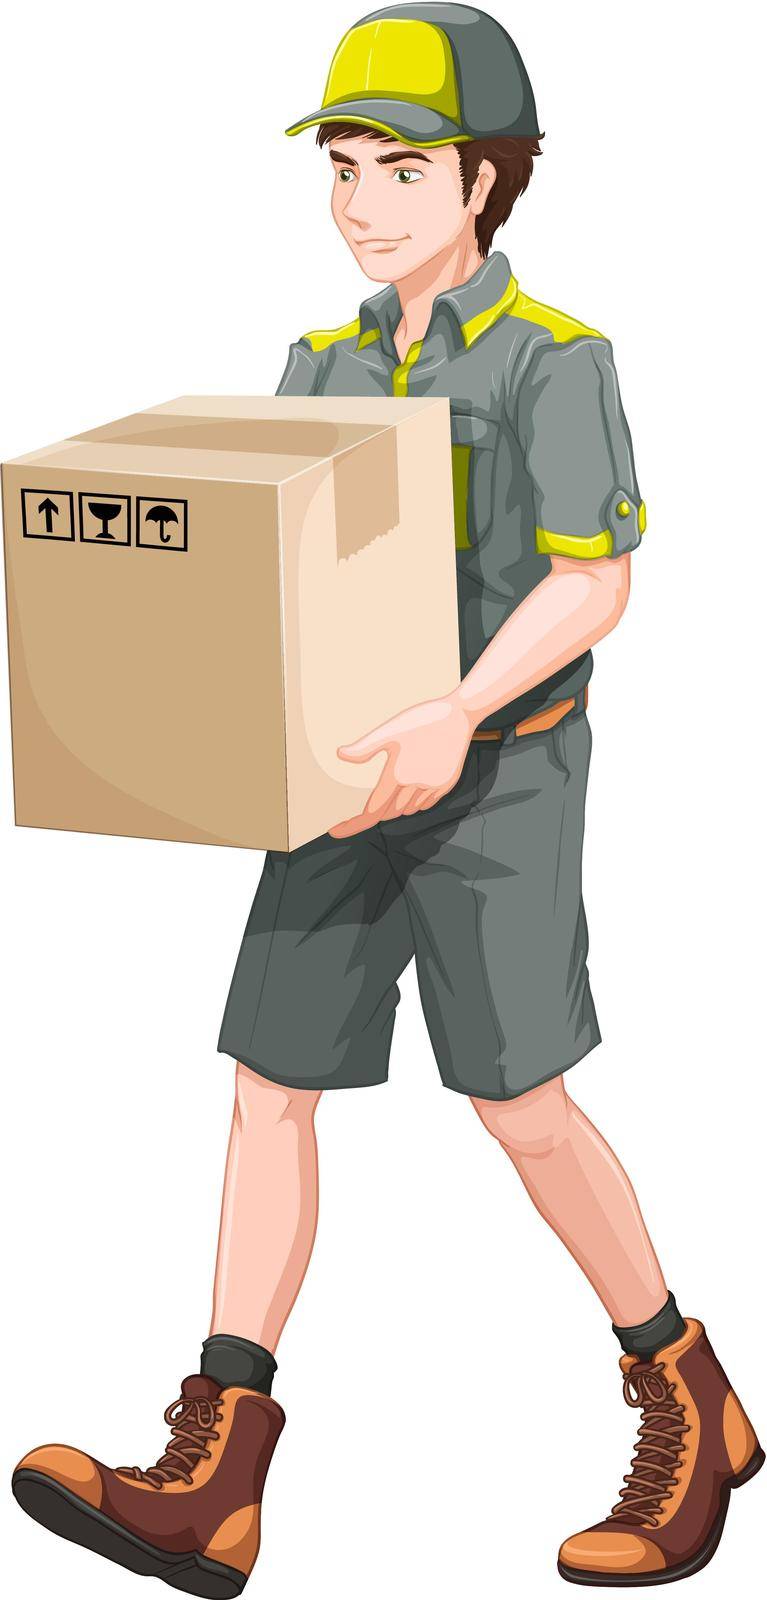 Illustration of a delivery man on a white background